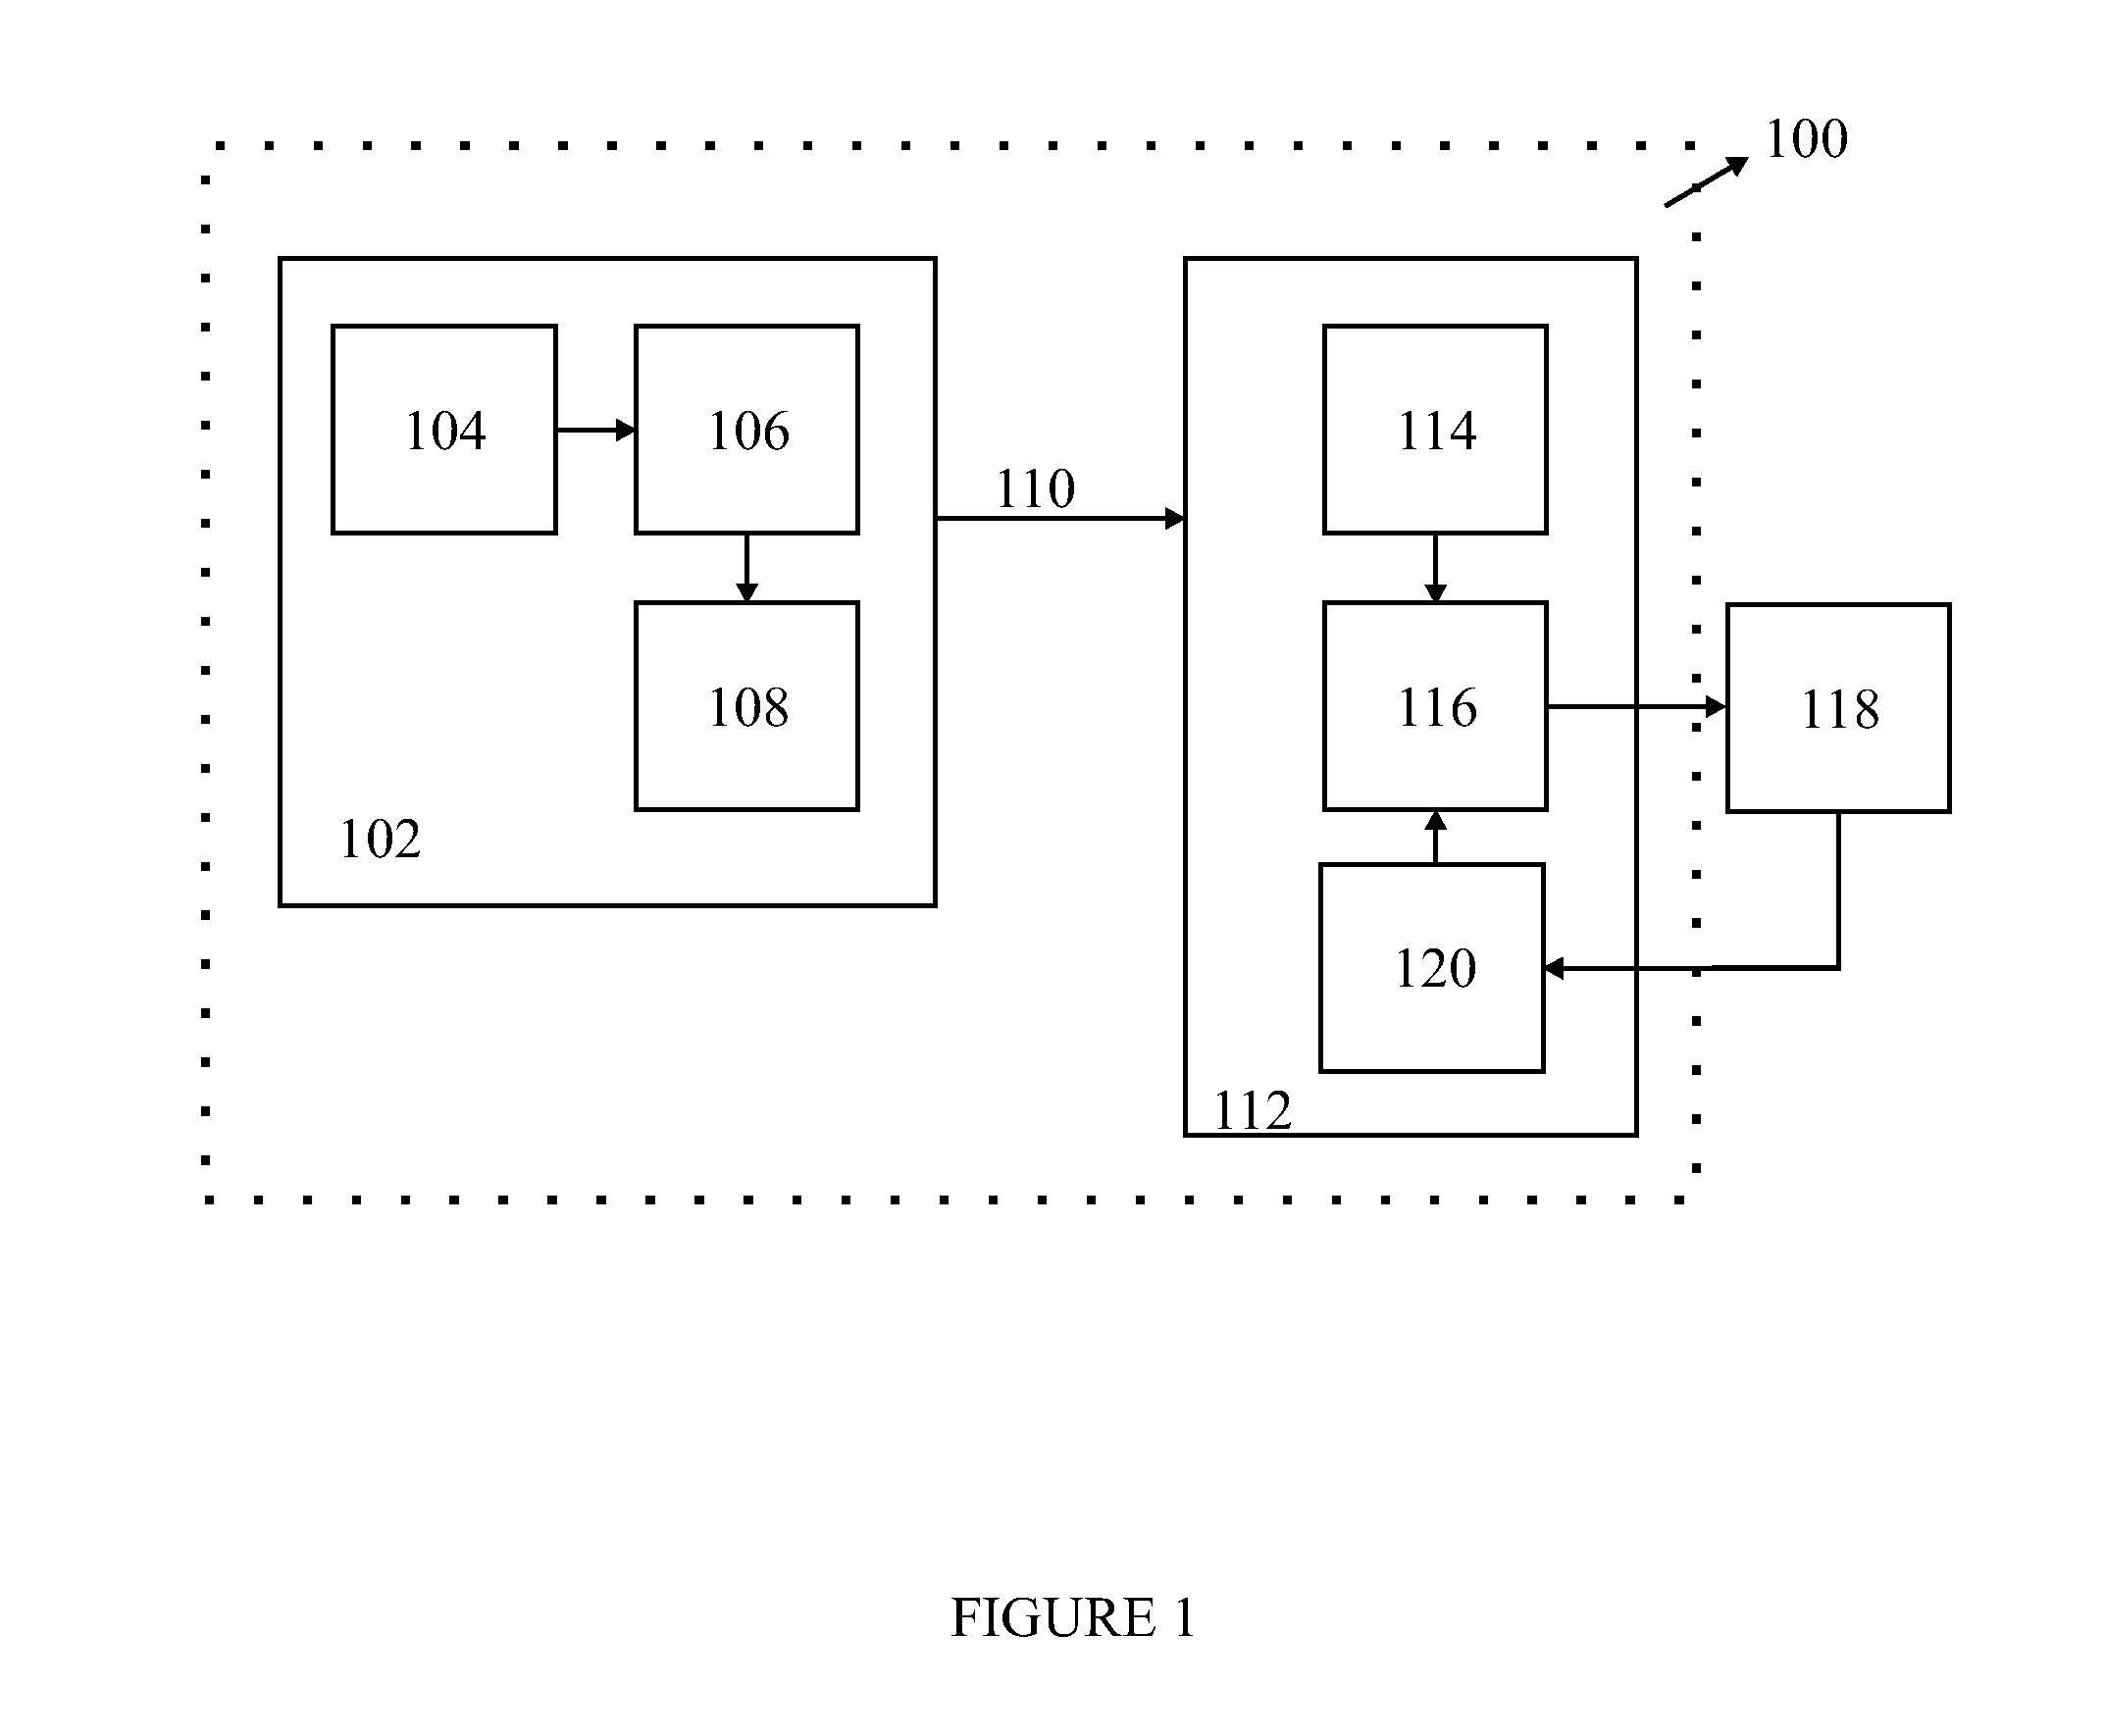 System for management, monitoring and control of hotel amenities and a method thereof